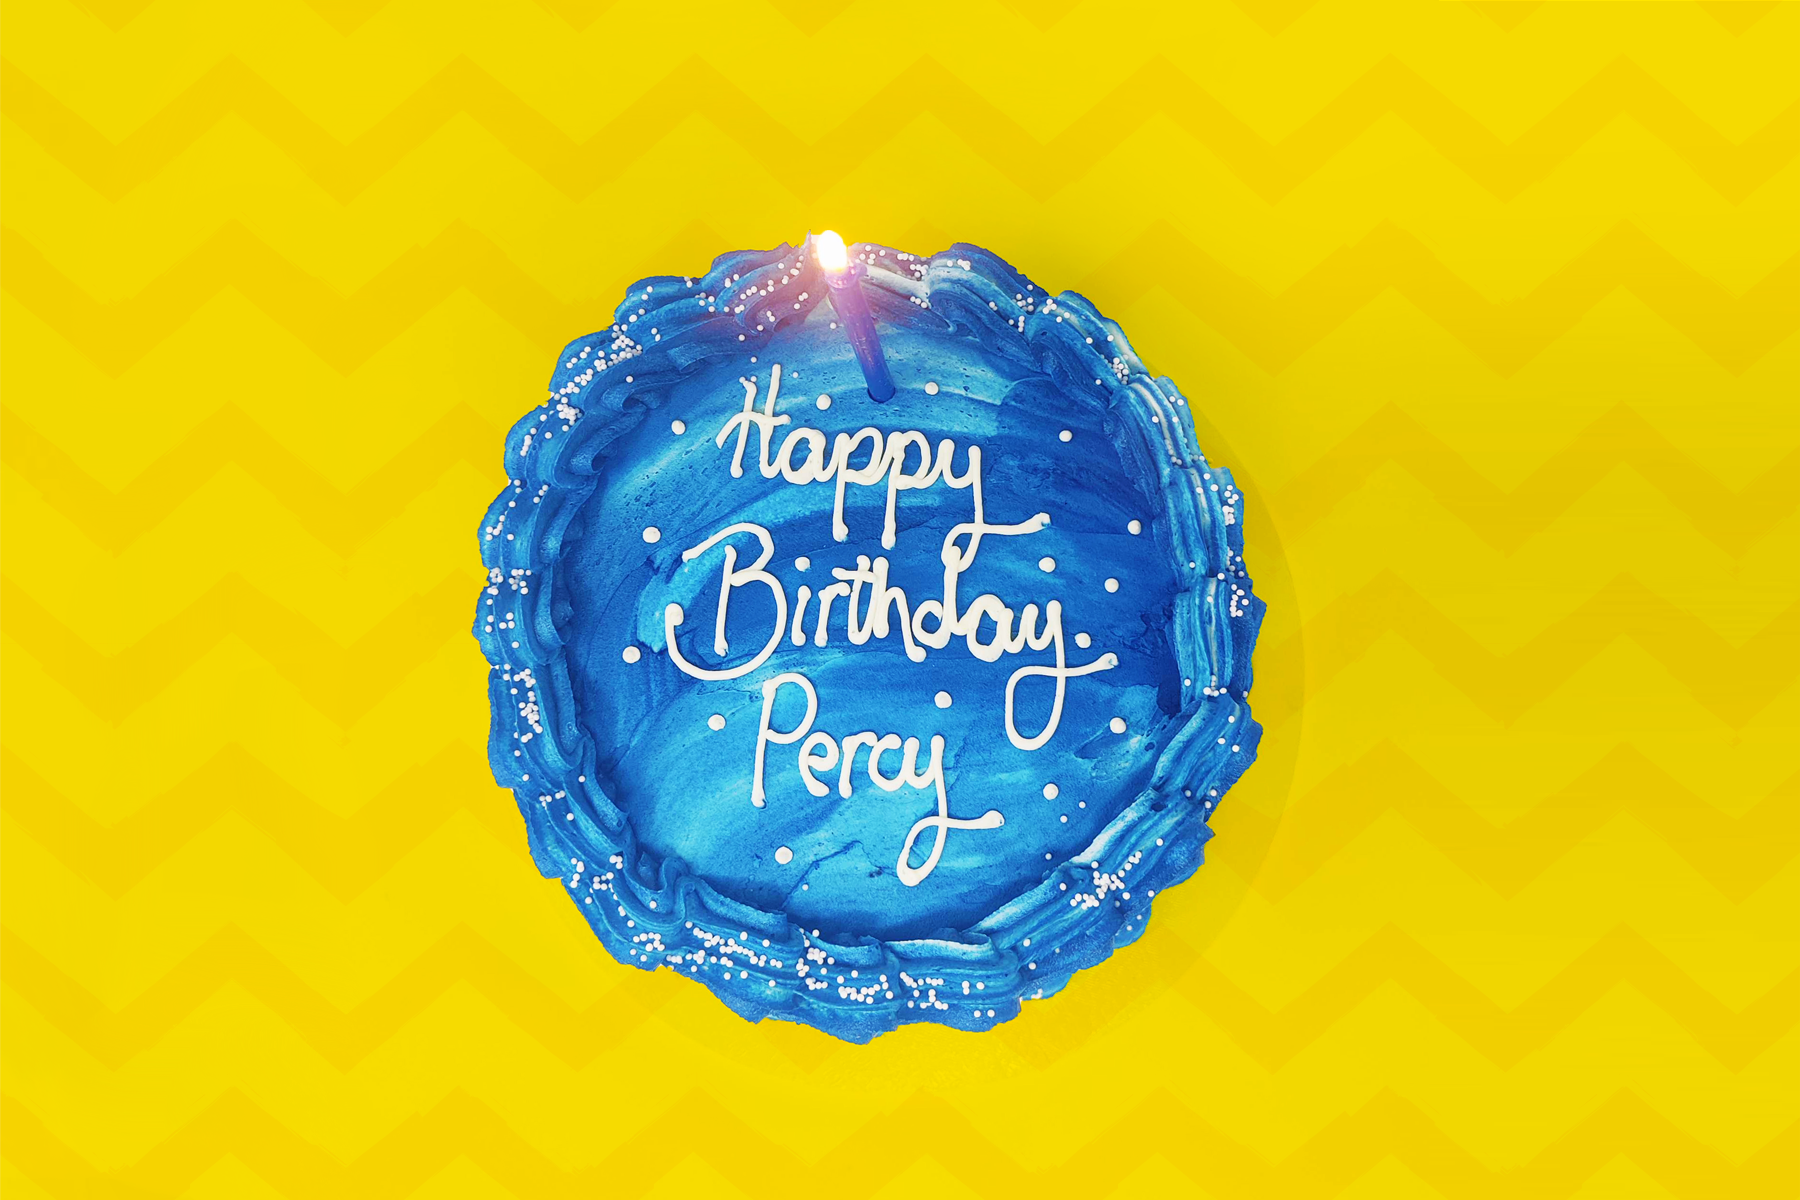 An image of a birthday cake on top of a yellow zig zag background. The cake has blue buttercream icing and has 'Happy Birthday Percy' written in white icing alongside a blue candle